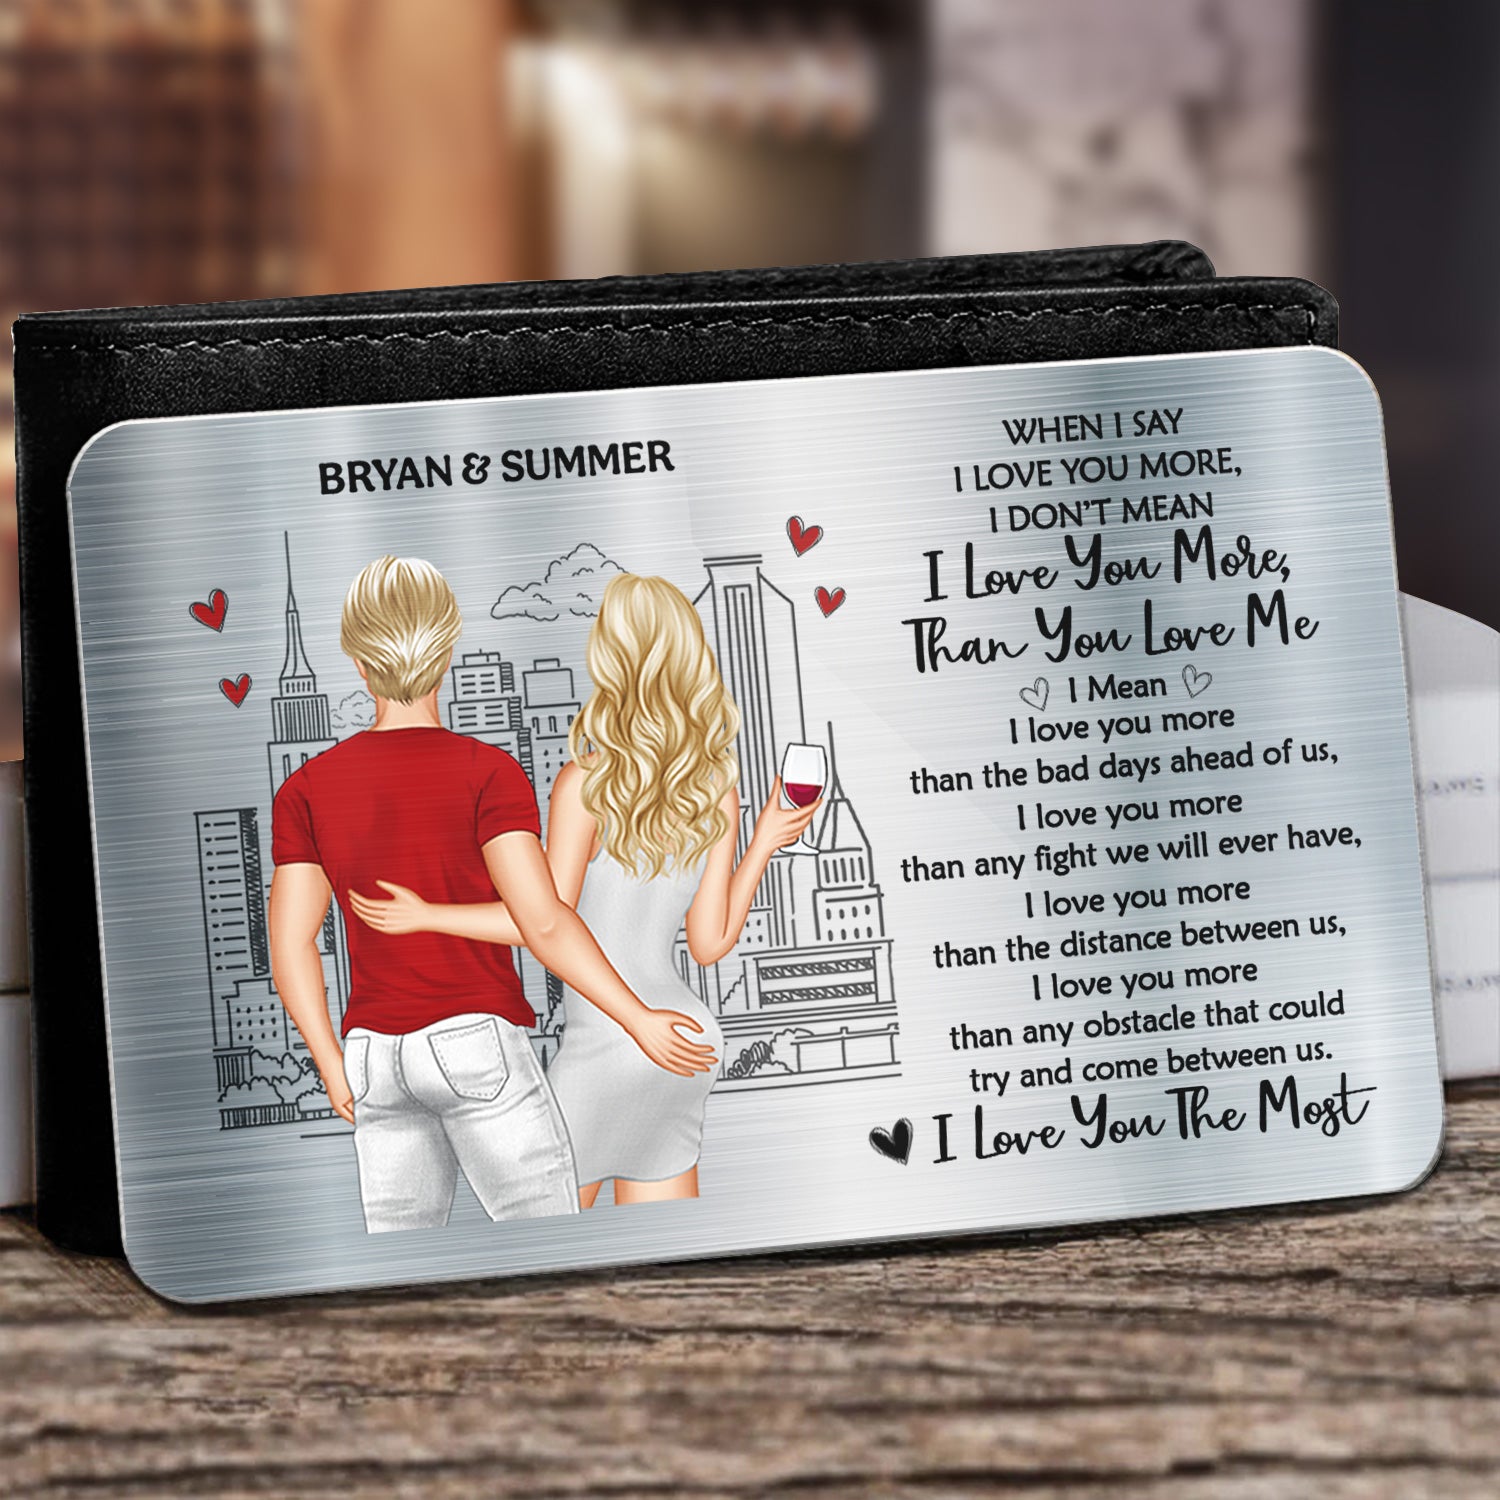 I Love You The Most - Unique Birthday Gifts, Wedding Anniversary, For Him, Husband - Personalized Aluminum Wallet Card